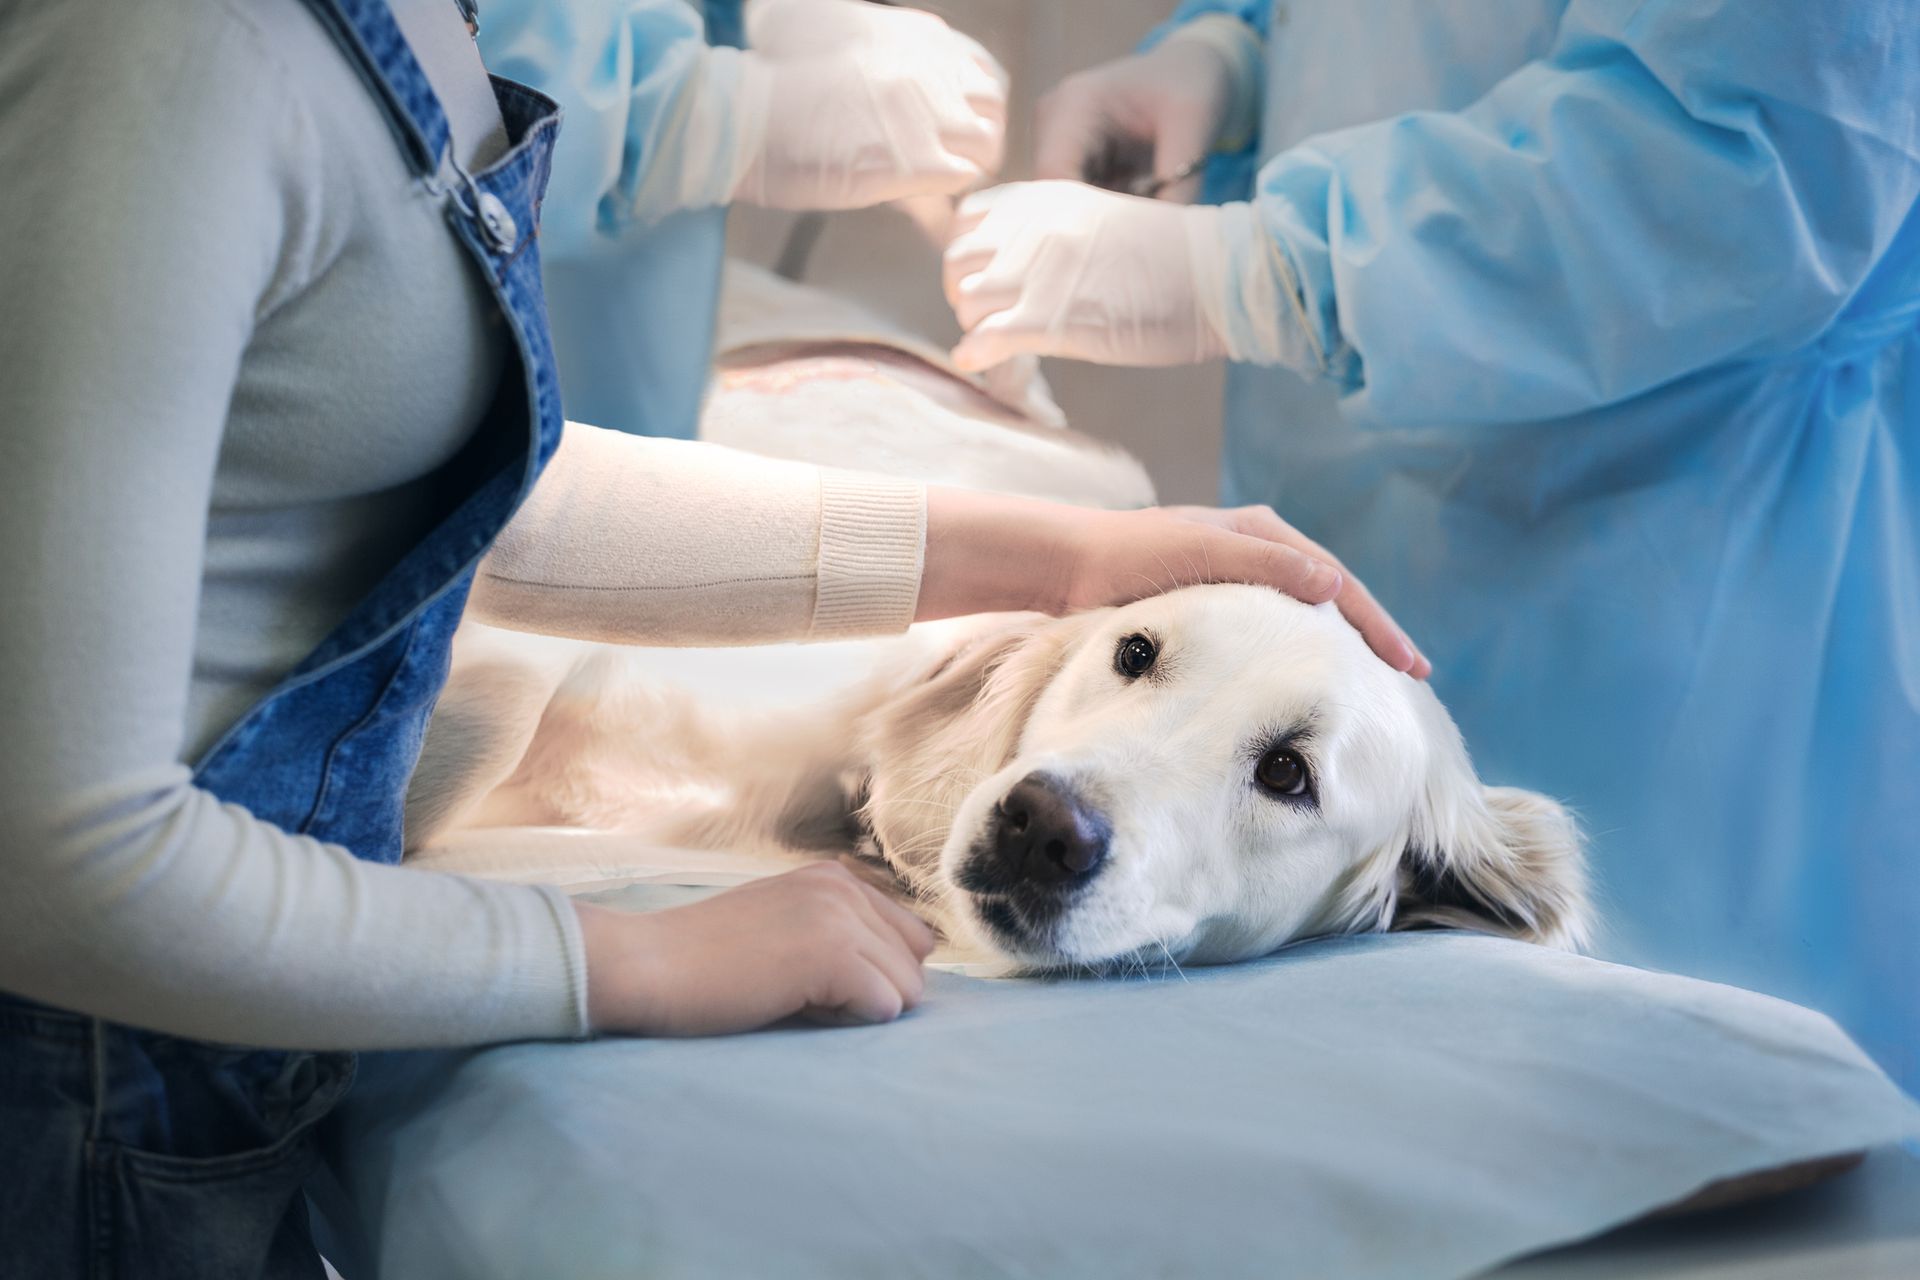 A dog is laying on a table while being operated on by a surgeon — Fort Myers, FL — Suburban Animal Hospital